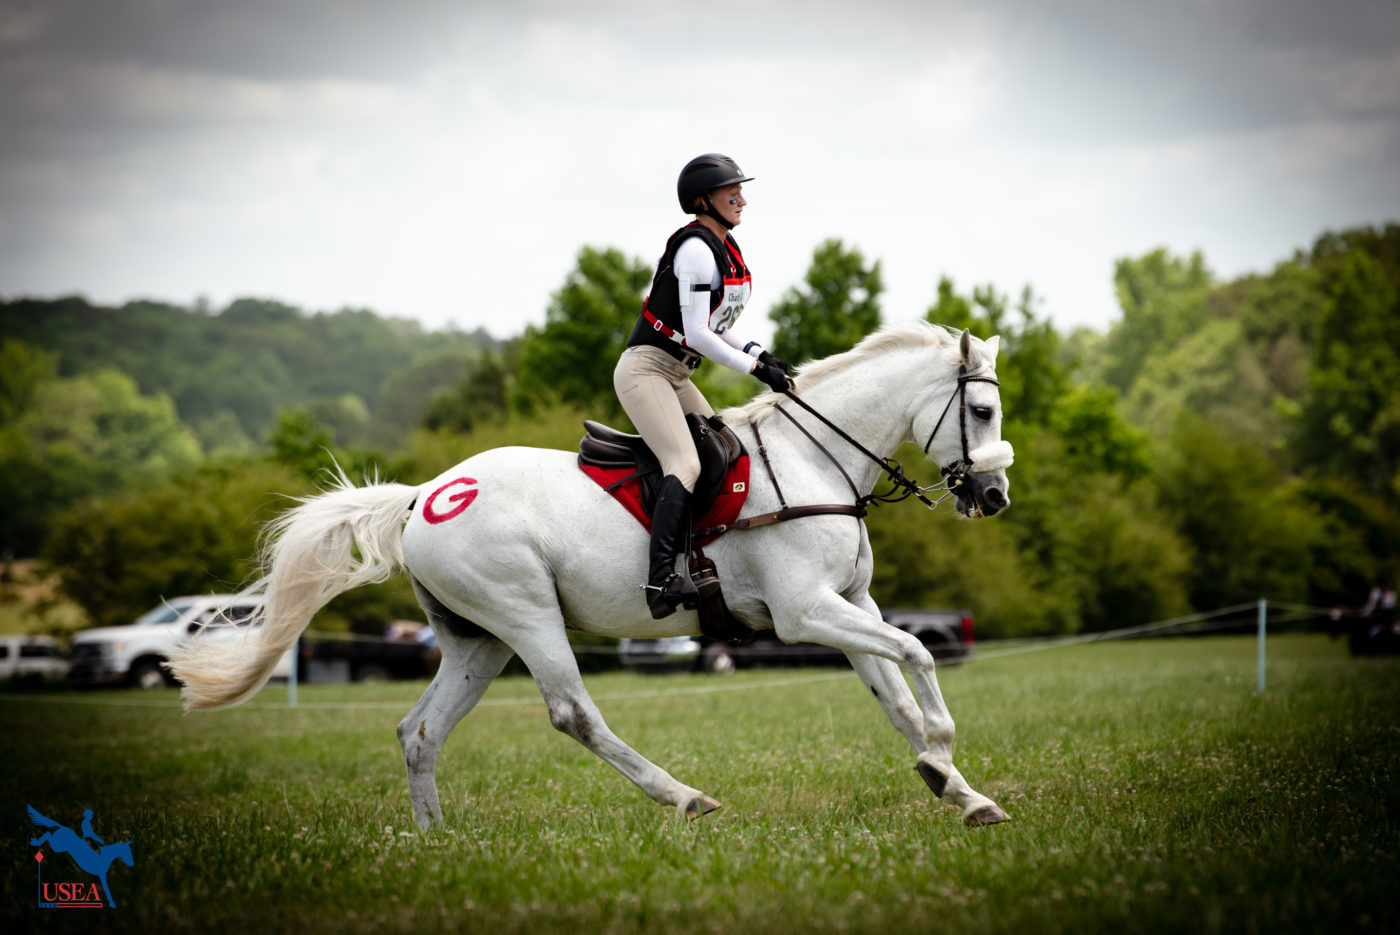 That UGA red really pops on a gorgeous gray. USEA/ Meagan DeLisle photo